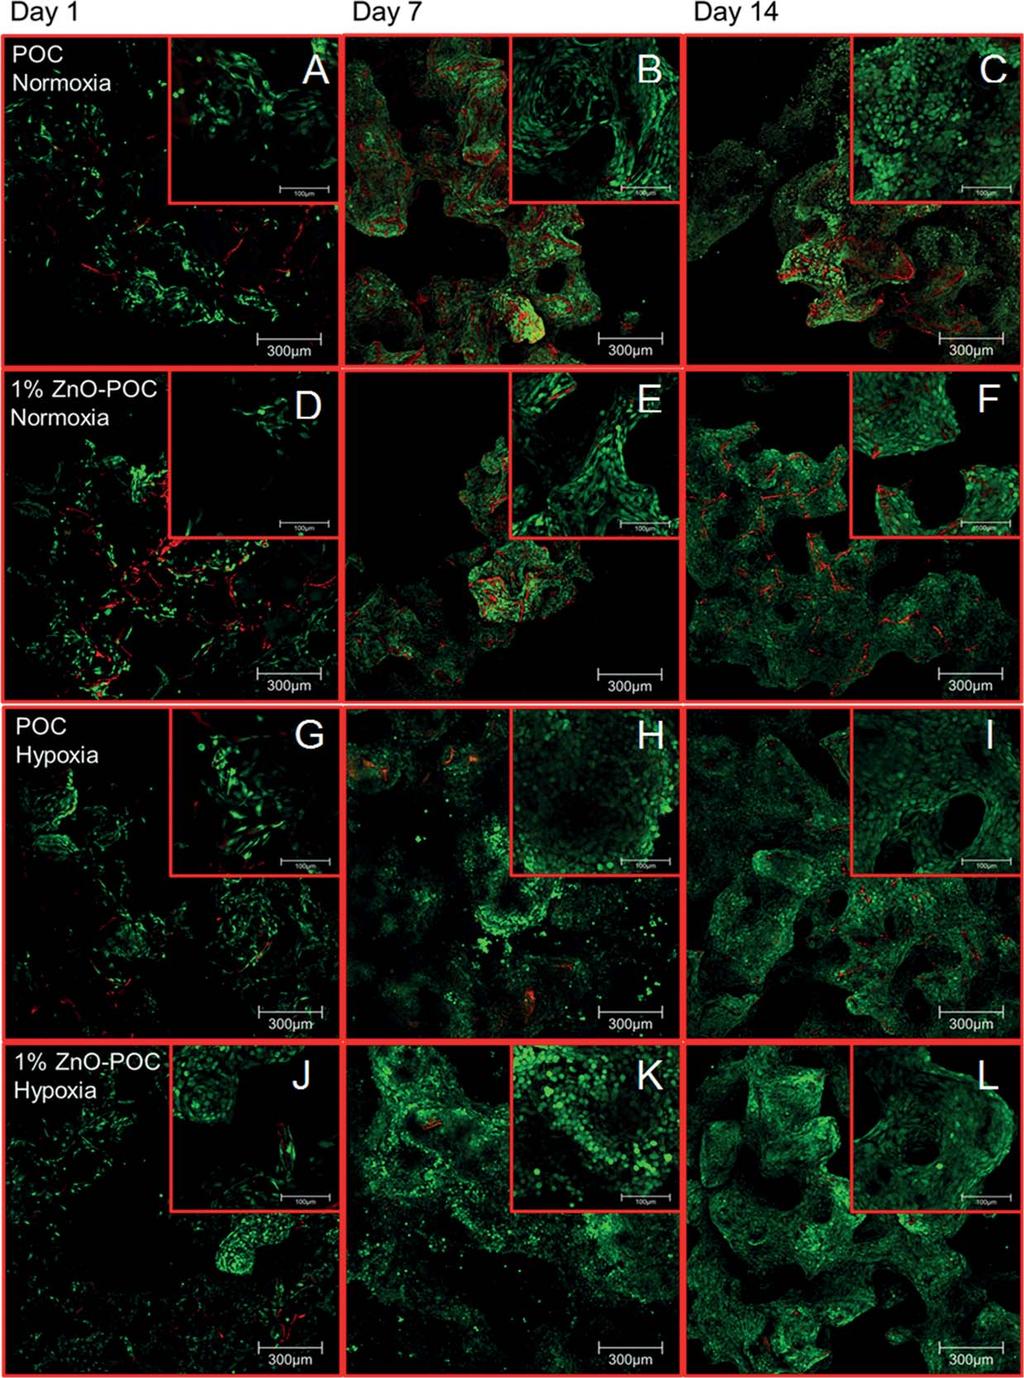 FIGURE 2. (A L) Live/dead assay of chondrocytes seeded on scaffold at day 1, 7, and 14 under normoxic and hypoxic conditions.